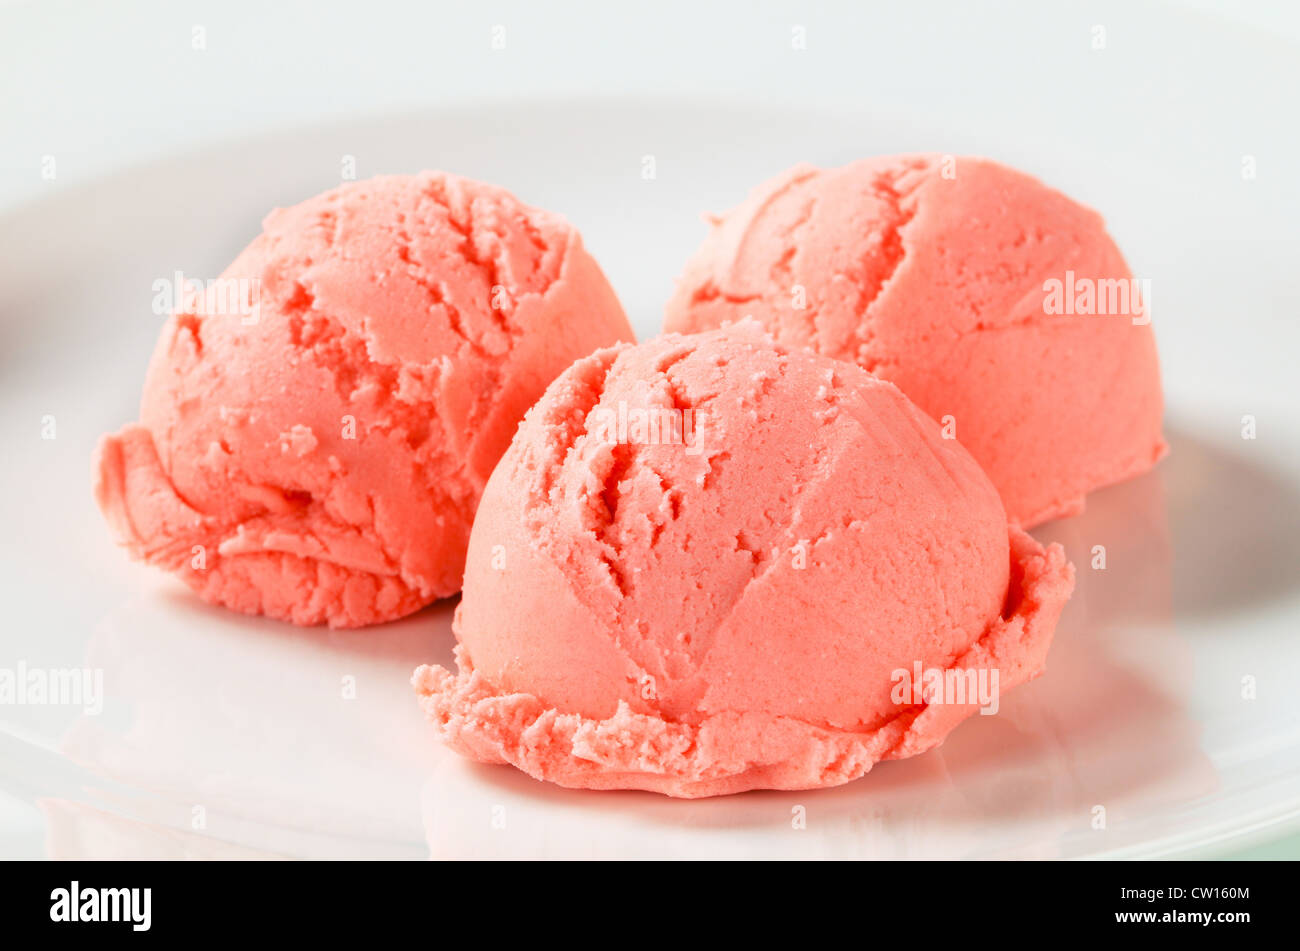 Scoops of strawberry ice cream on plate Stock Photo